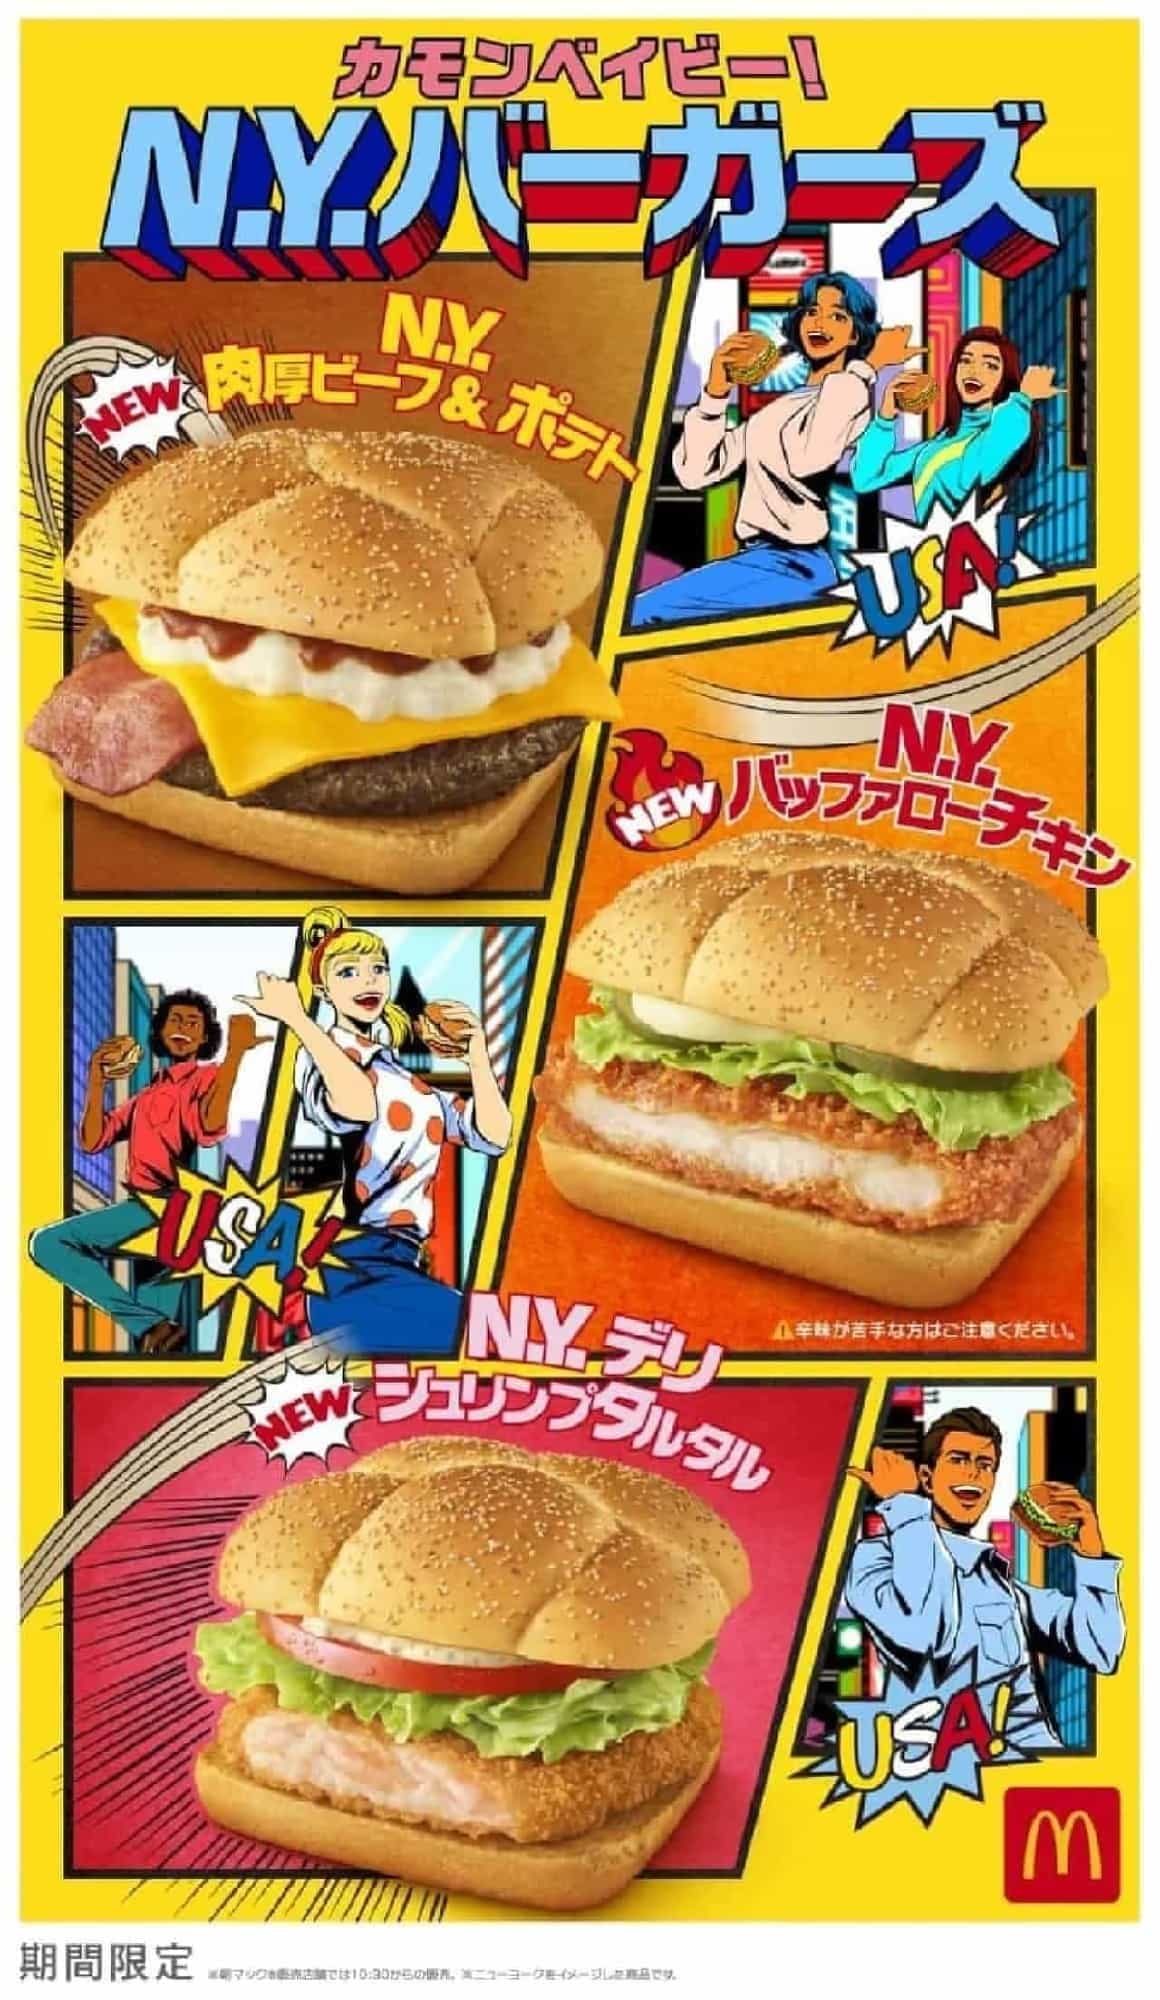 McDonald's "Come on Baby! N.Y. Burgers" Three New Products